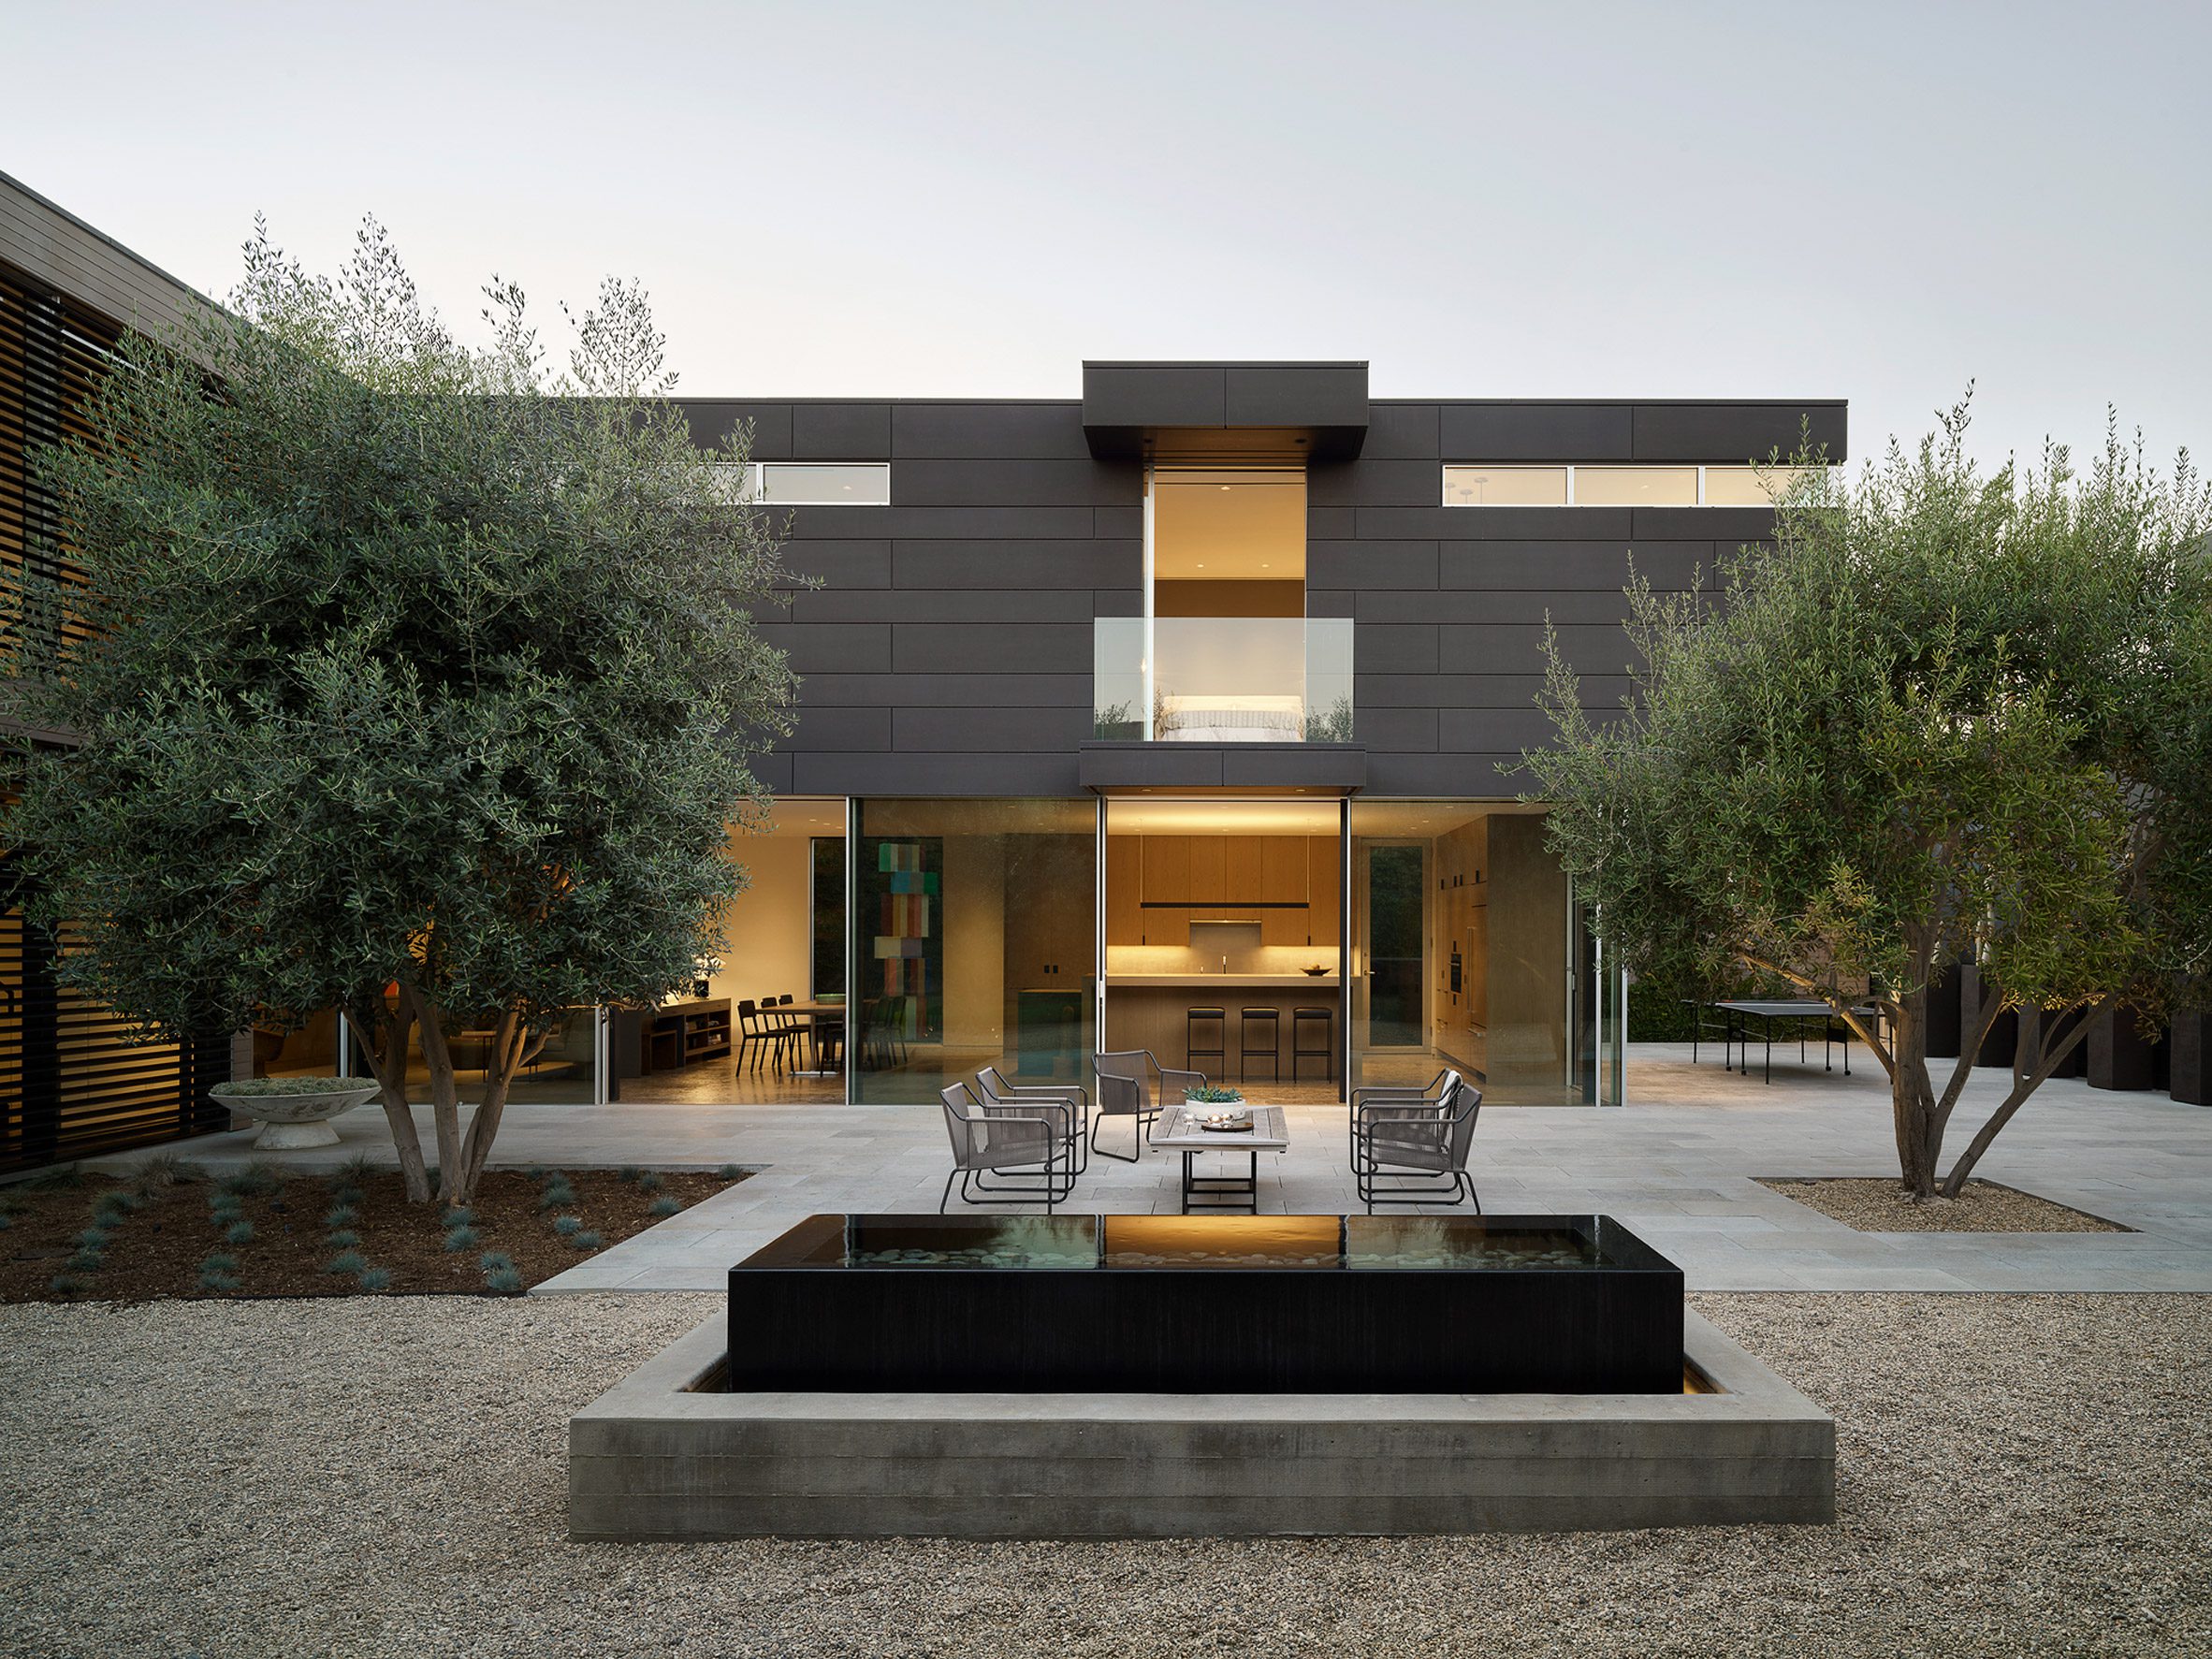 A black clad house with seating outside